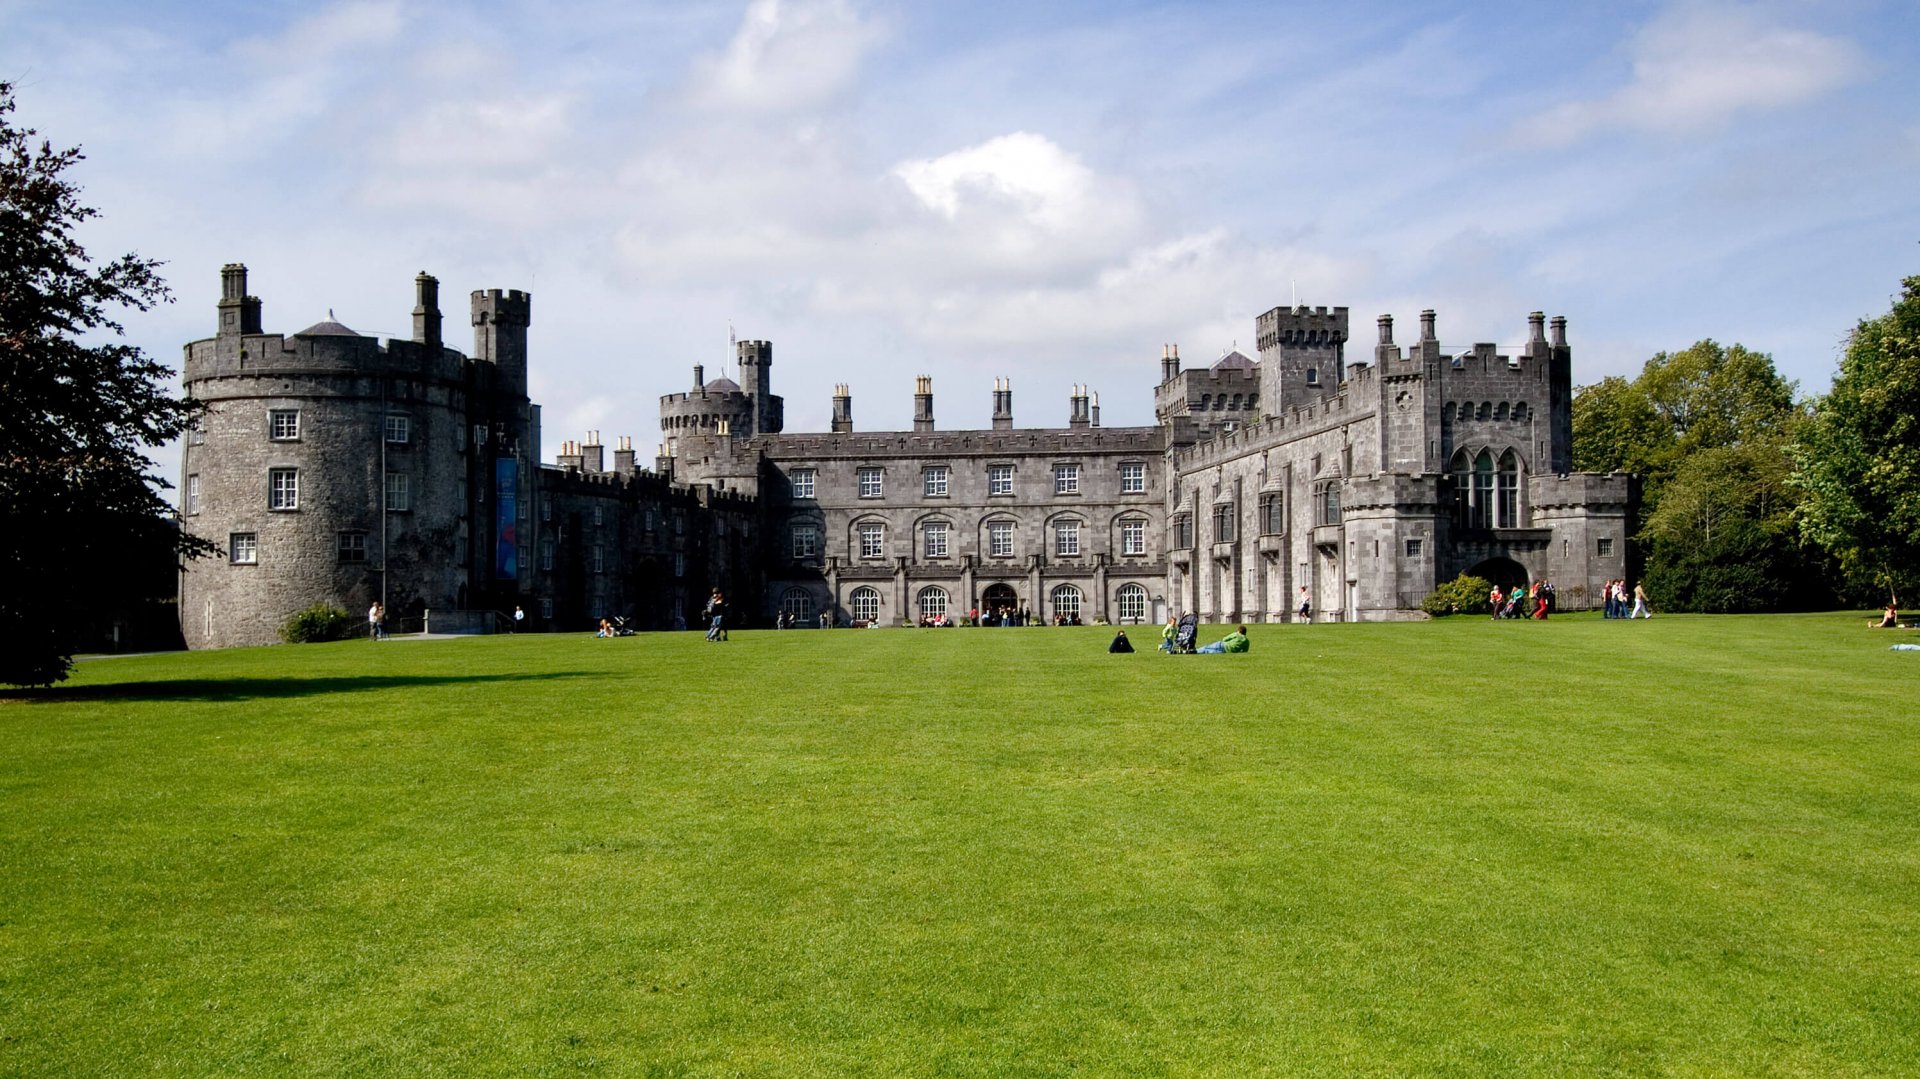 Exterior of Kilkenny Castle with lawn